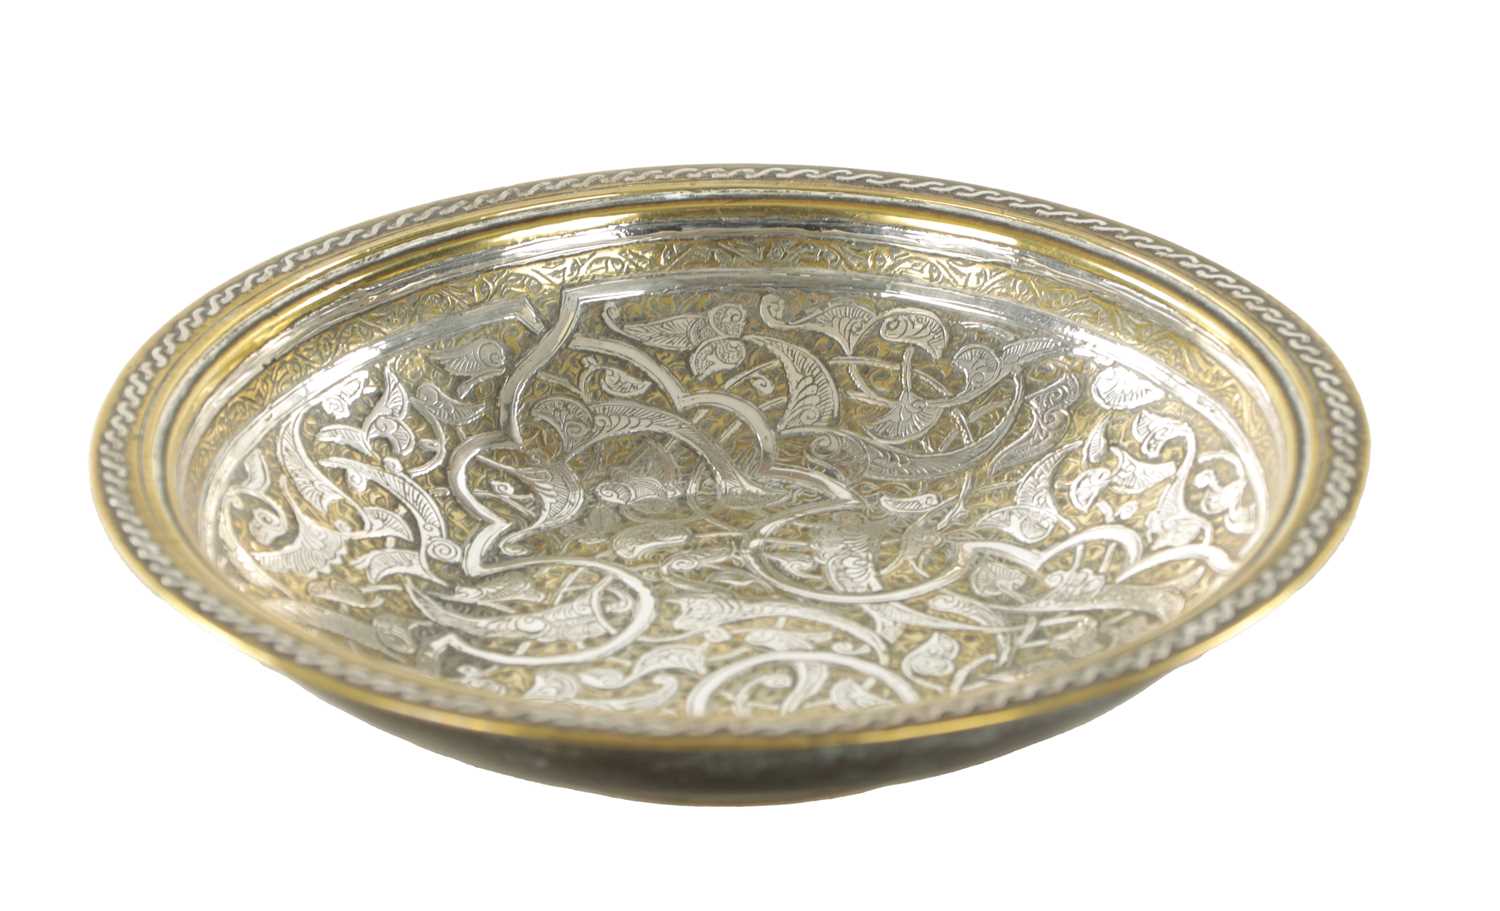 AN 18TH/19TH CENTURY MIDDLE EASTERN CAST BRASS AND SILVER INLAY SHALLOW BOWL